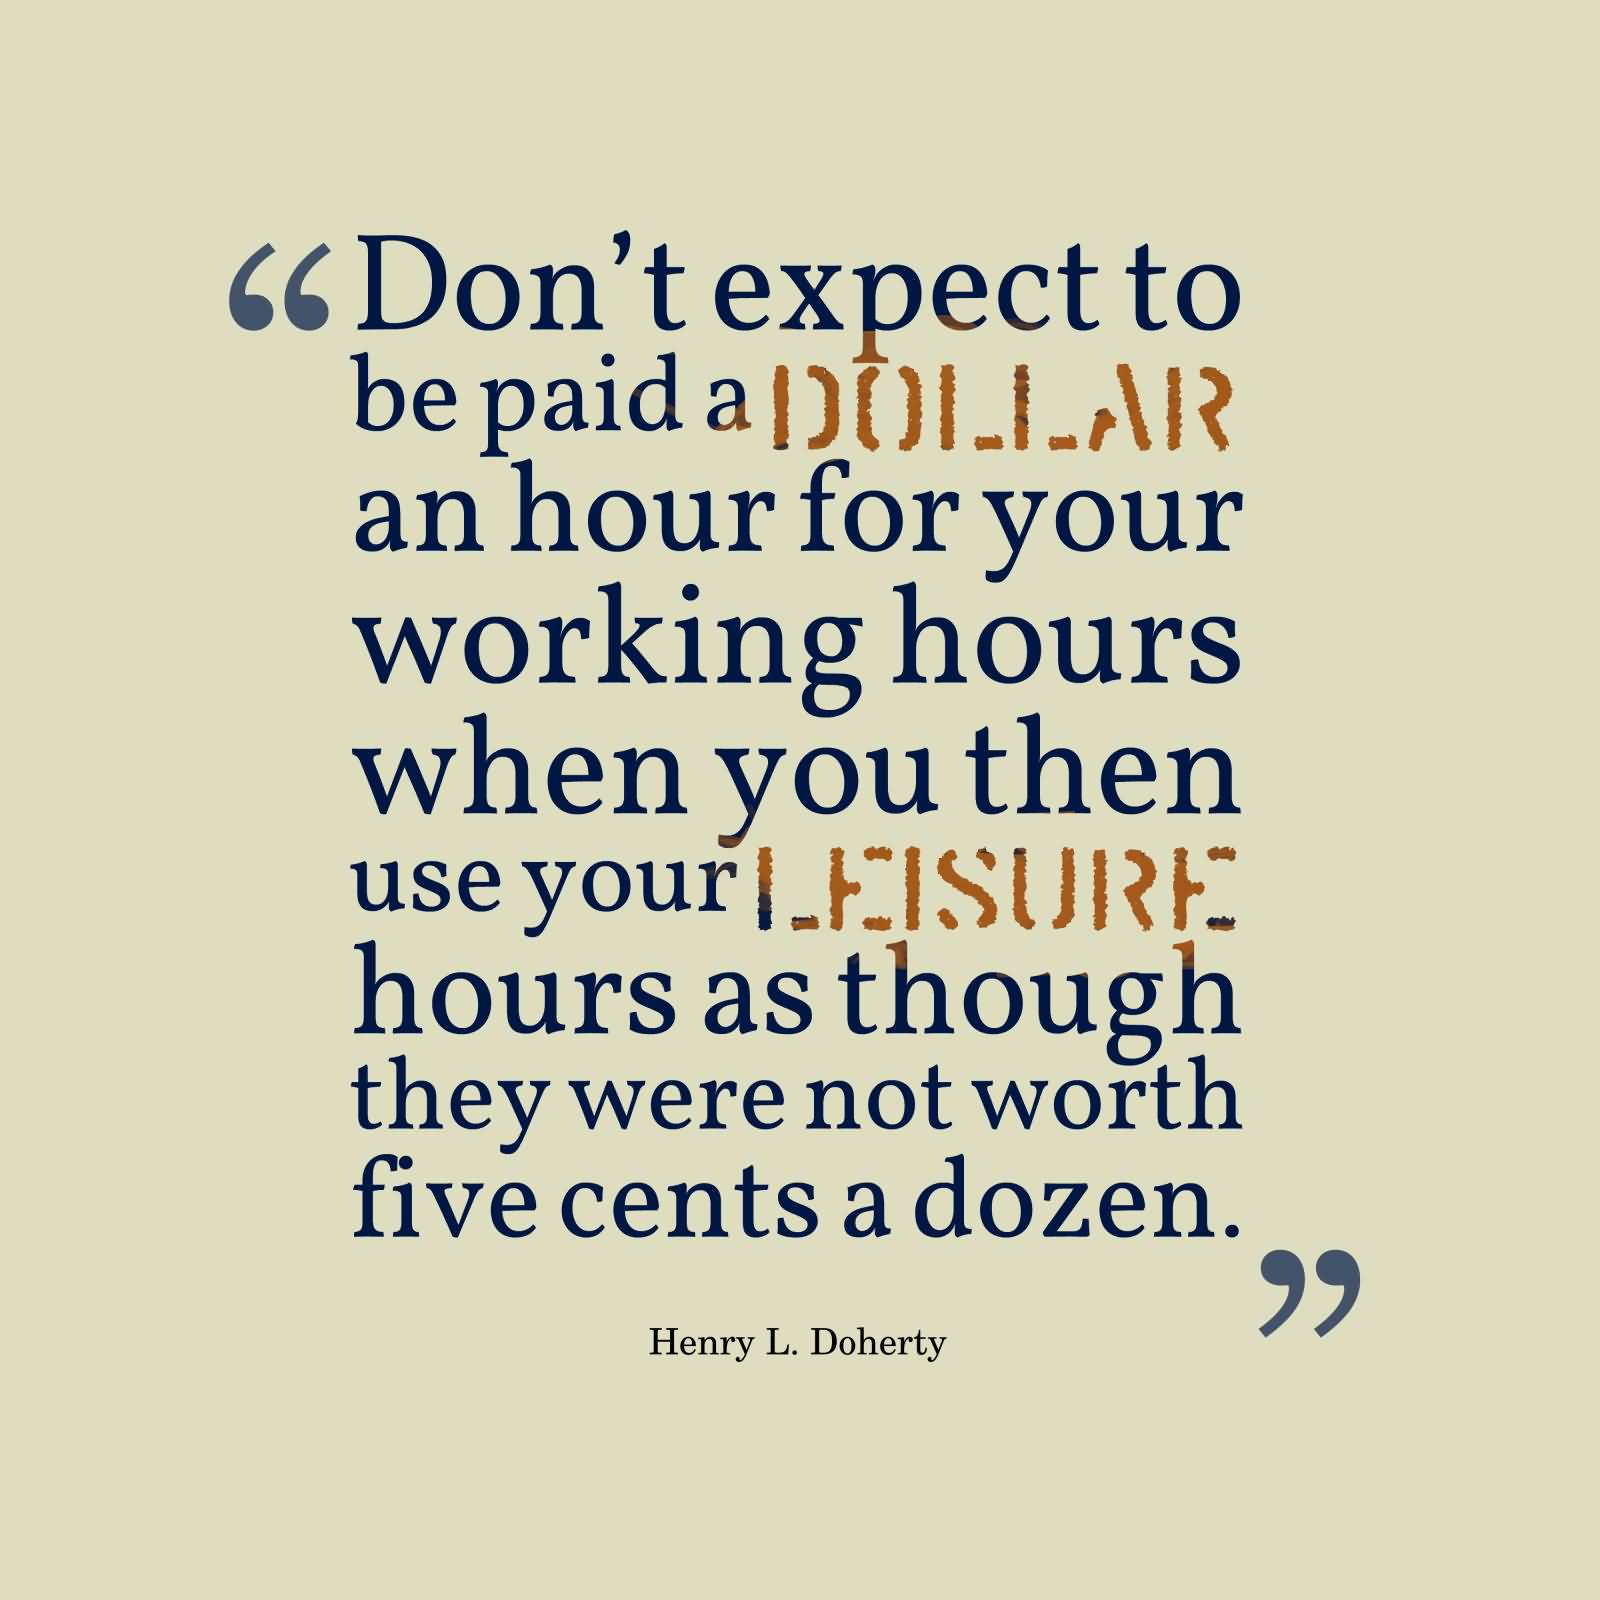 Don't expect to be paid a dollar an hour for your working hours when you then use your leisure hours as though they were not worth five cents ... Henry L. Doherty